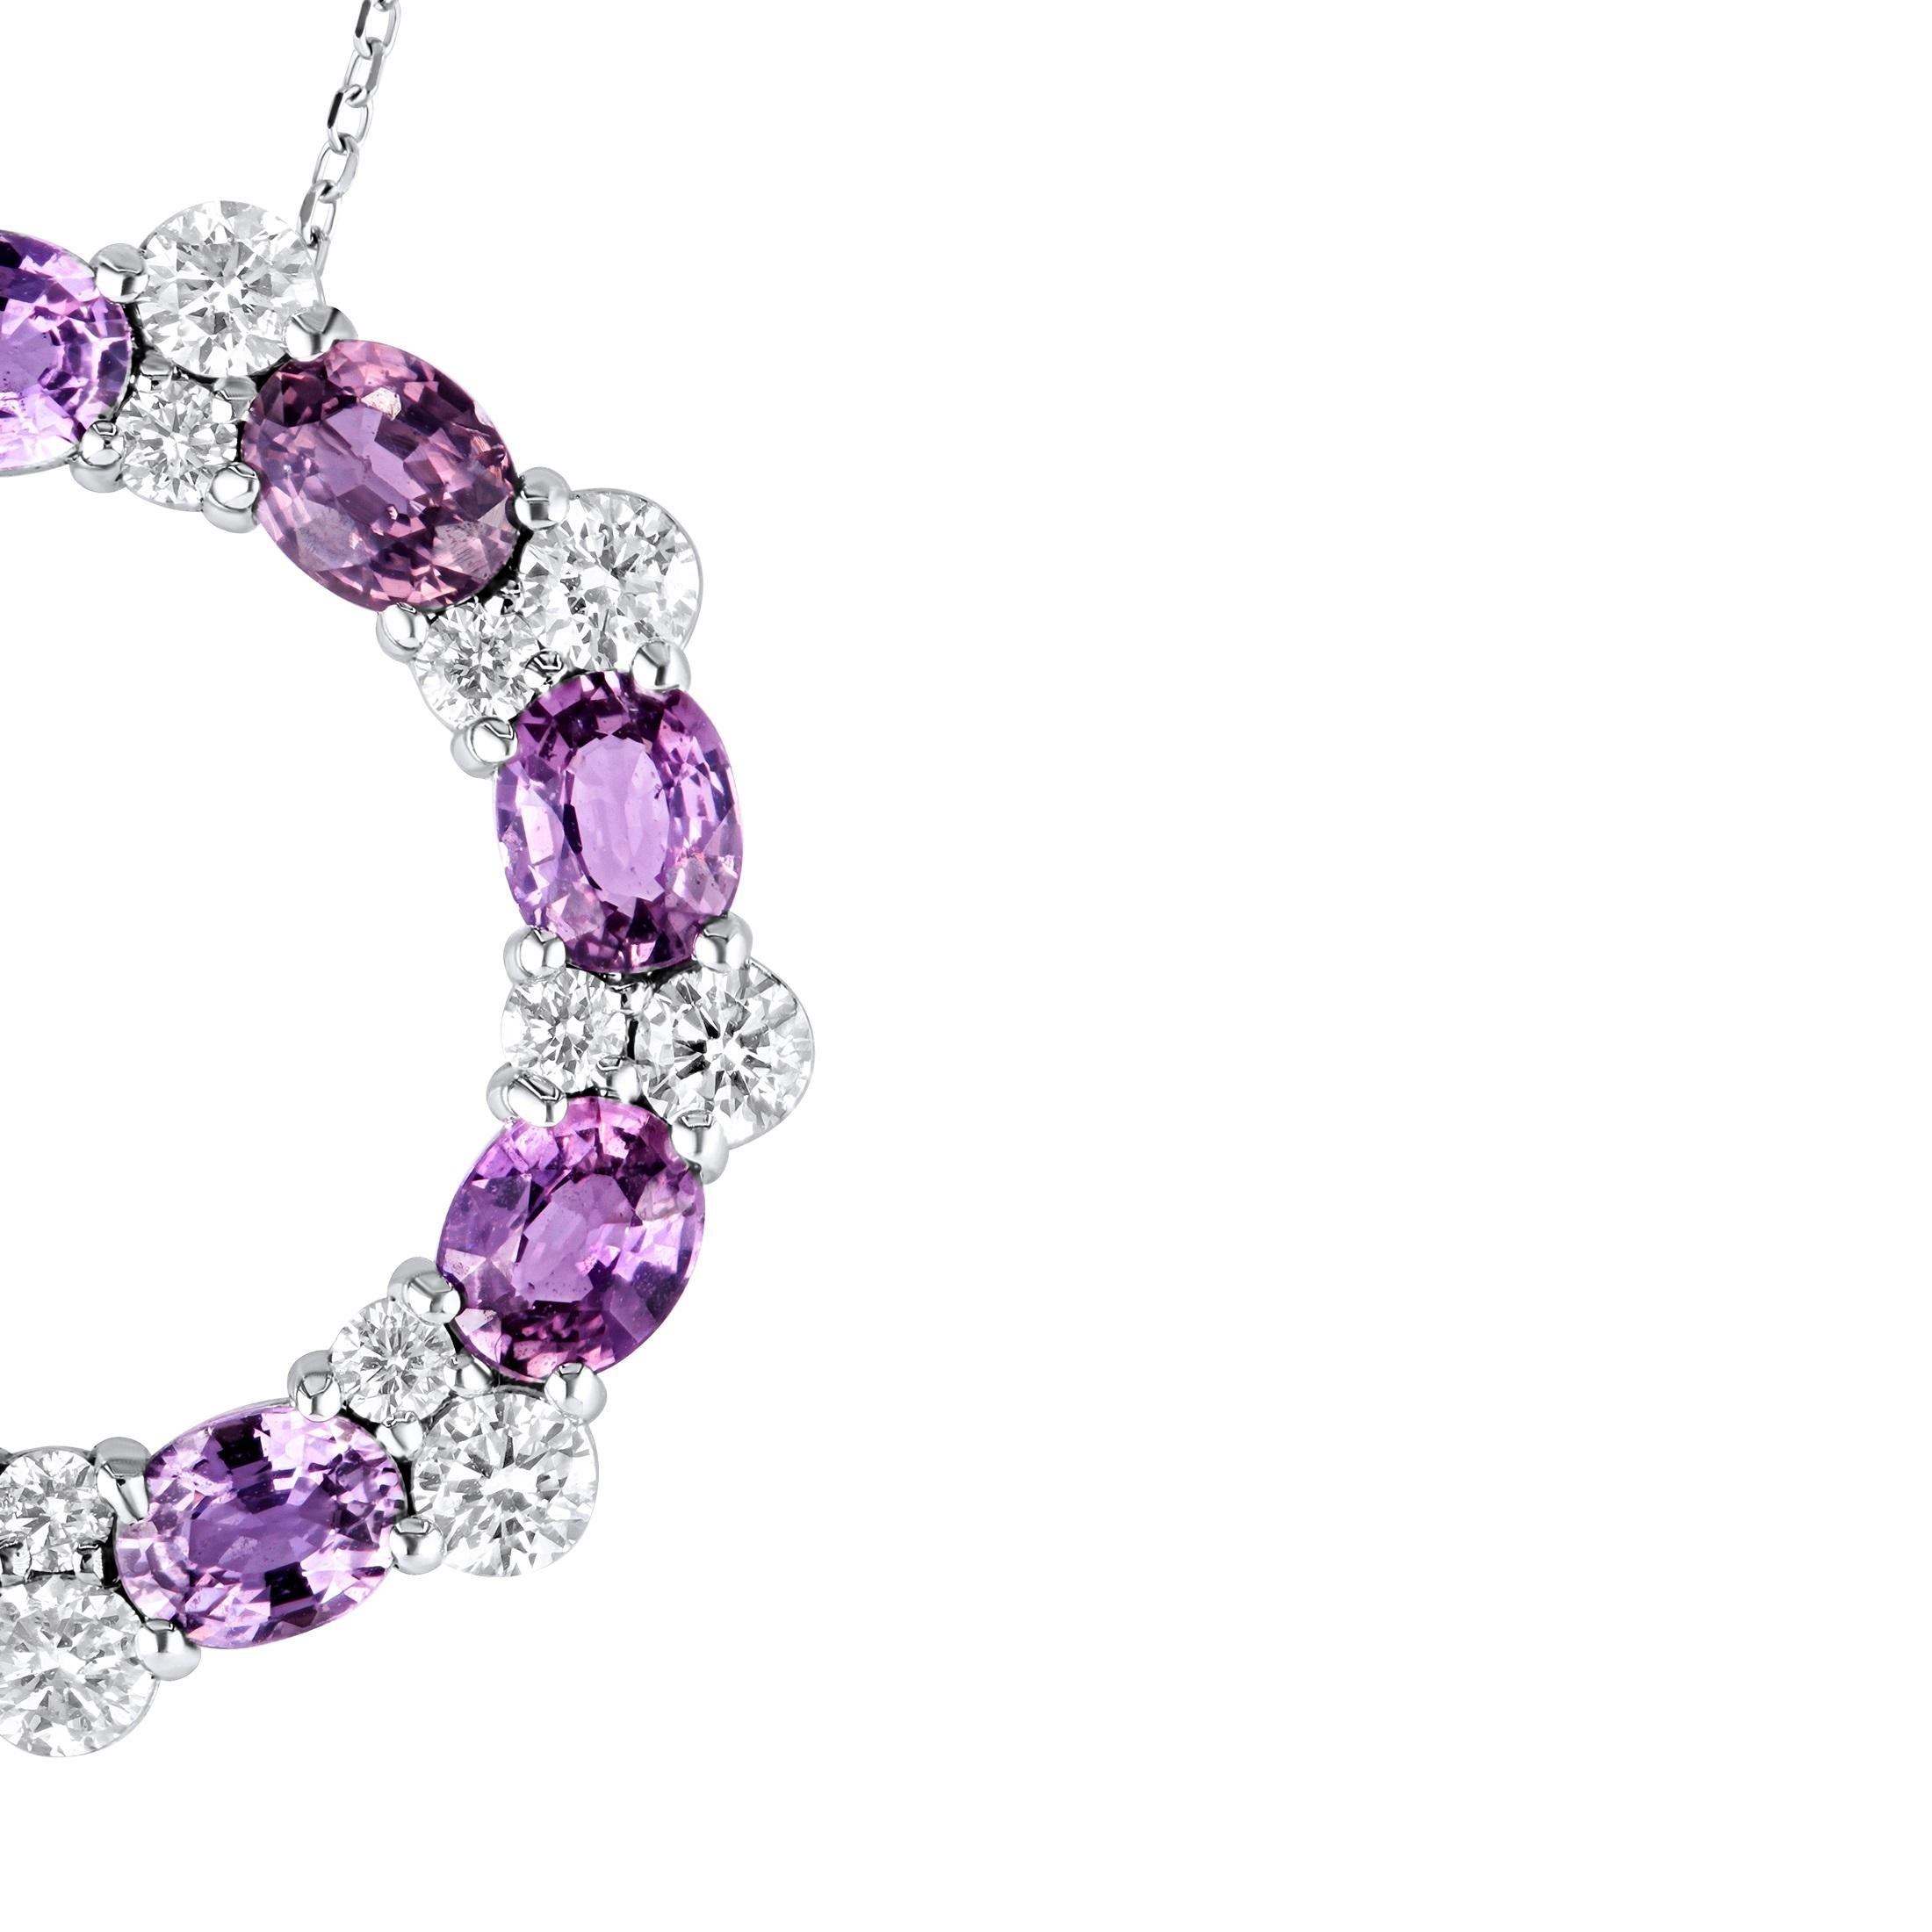 At the heart of this pendant lies a resplendent collection of oval purple sapphires, totaling 3.46 carats. These vibrant, purple sapphires are carefully chosen to radiate warmth and grace. The sapphires, with their exquisite color and brilliance,